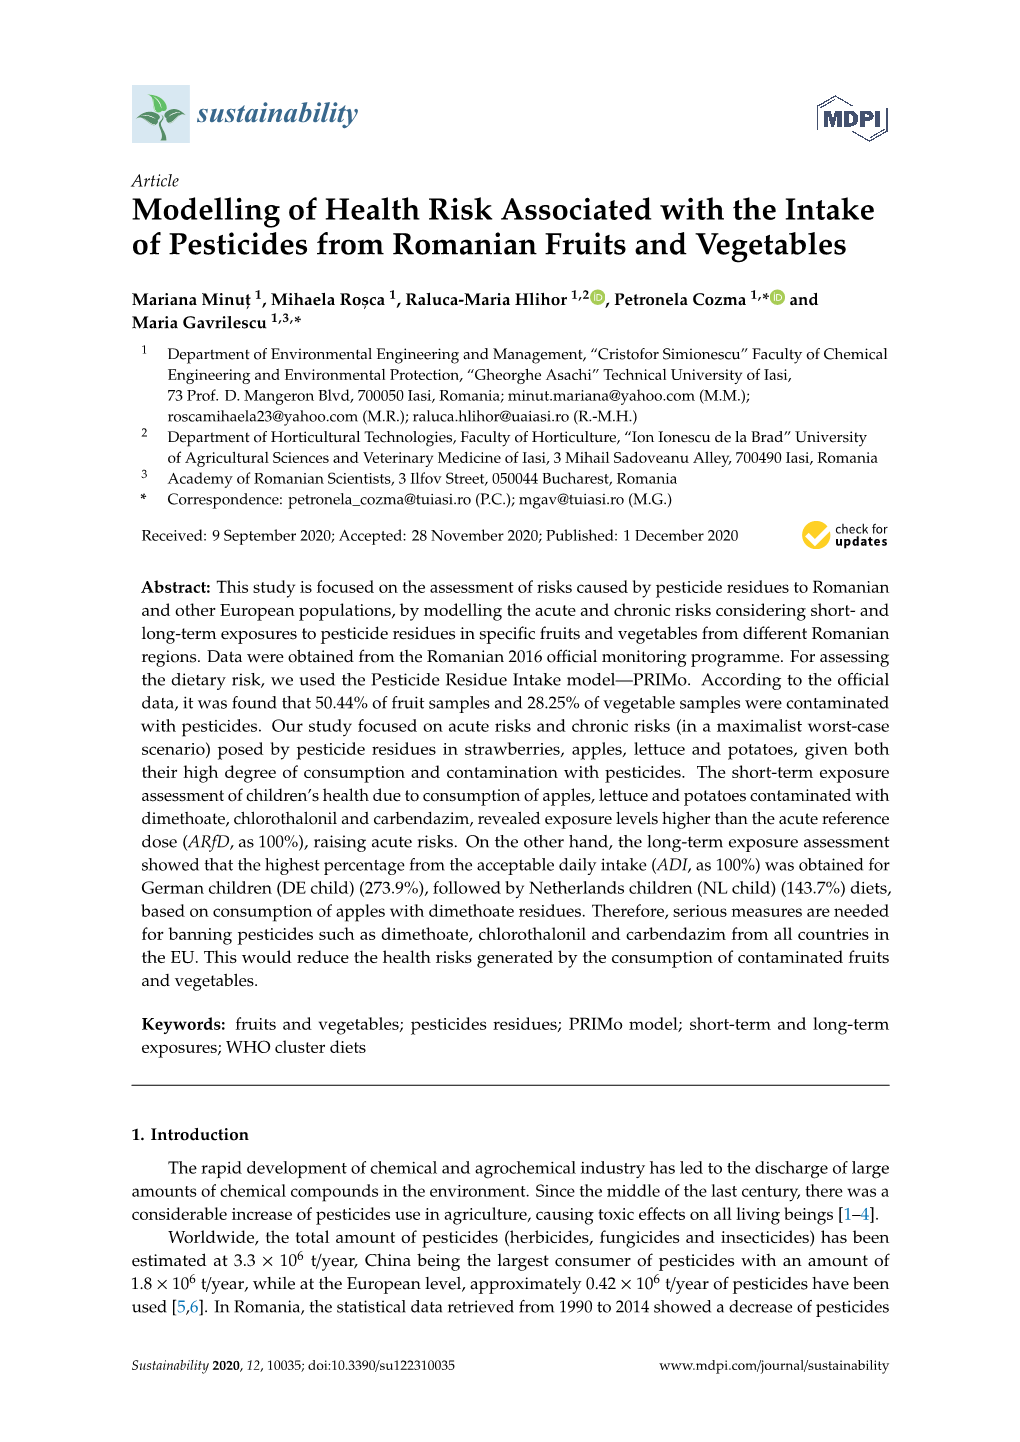 Modelling of Health Risk Associated with the Intake of Pesticides from Romanian Fruits and Vegetables